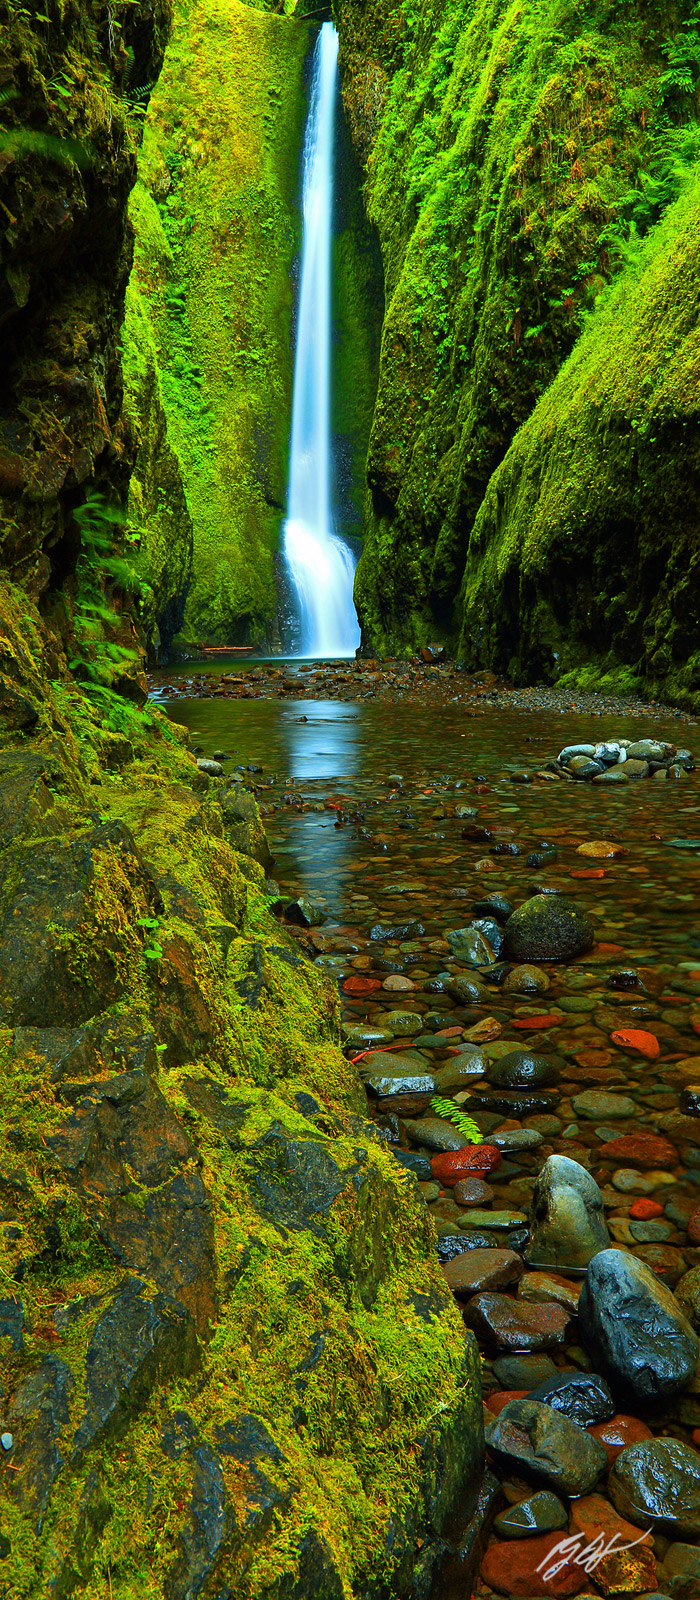 Oneonta Falls in Oneonta Gorge, Columbia River Gorge National Scenic Area in Oregon